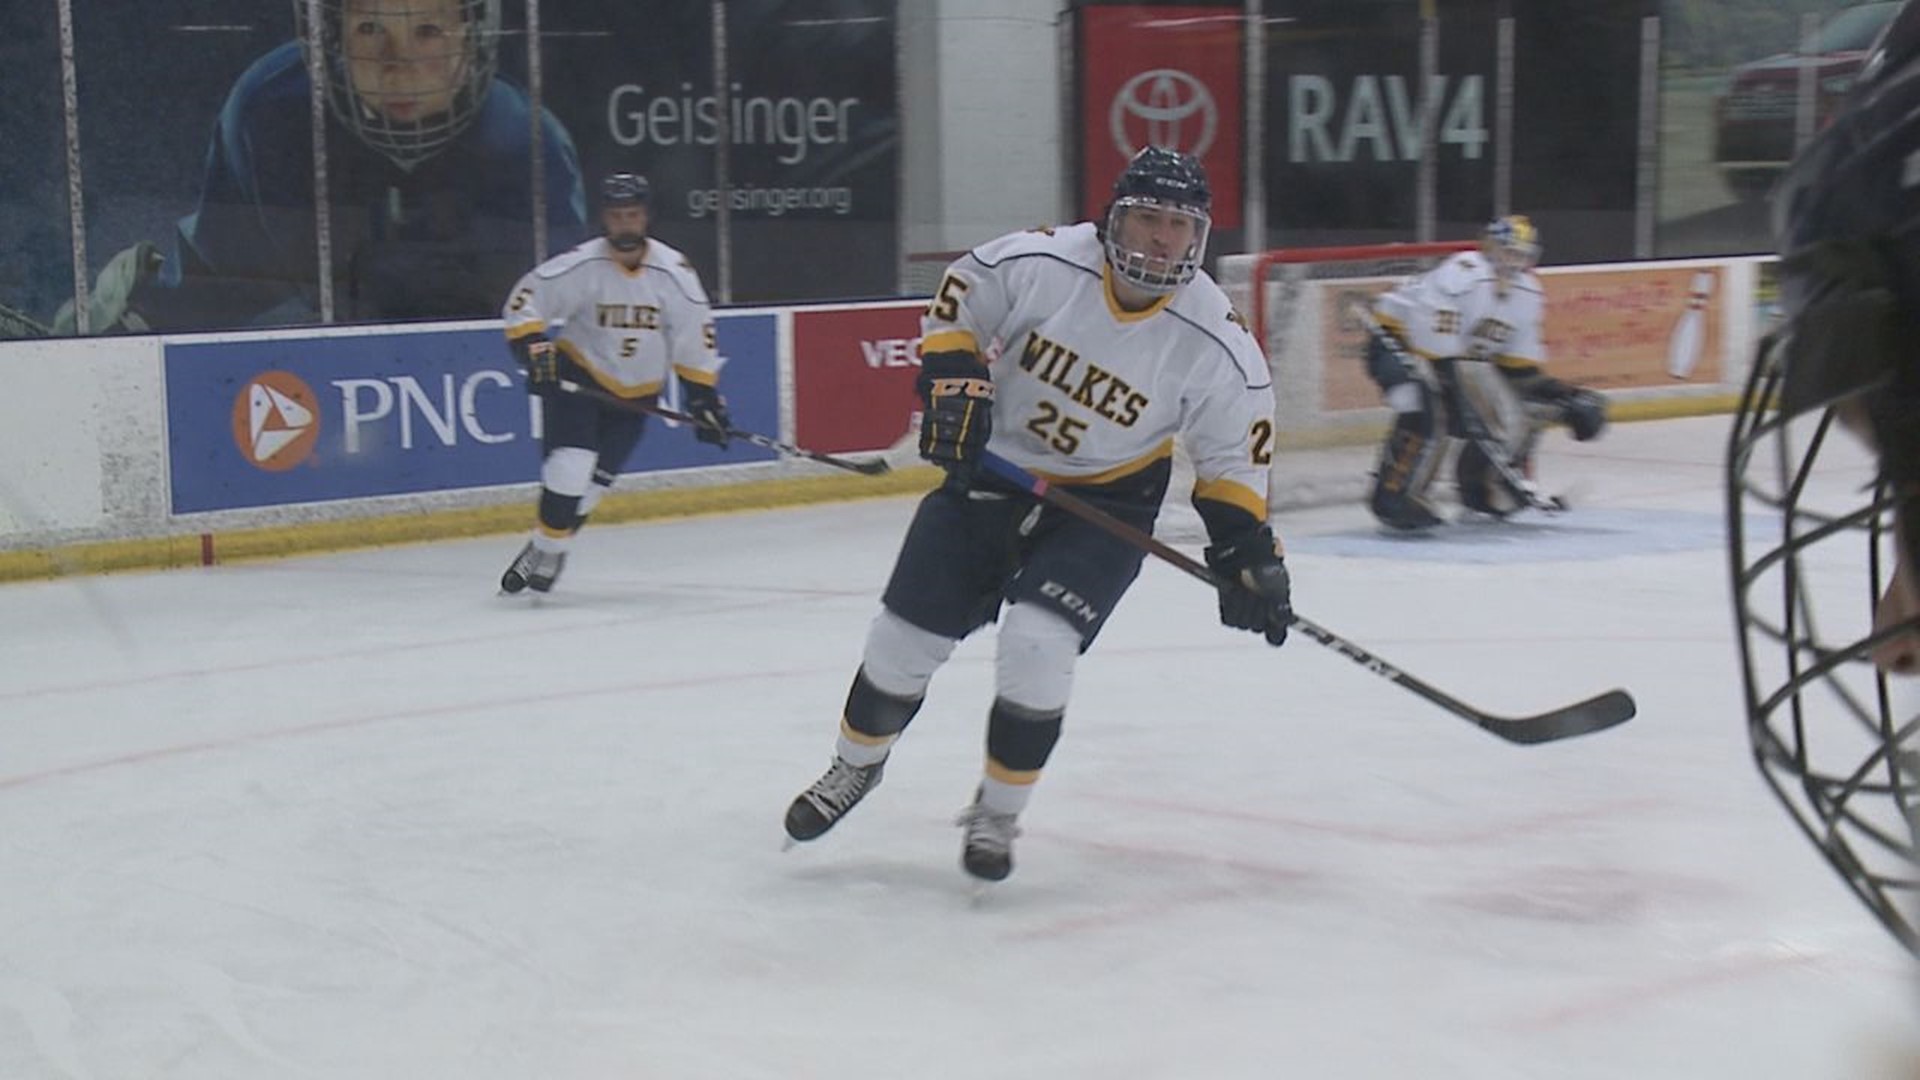 This is the 4th season for the Men's program in Wilkes-Barre